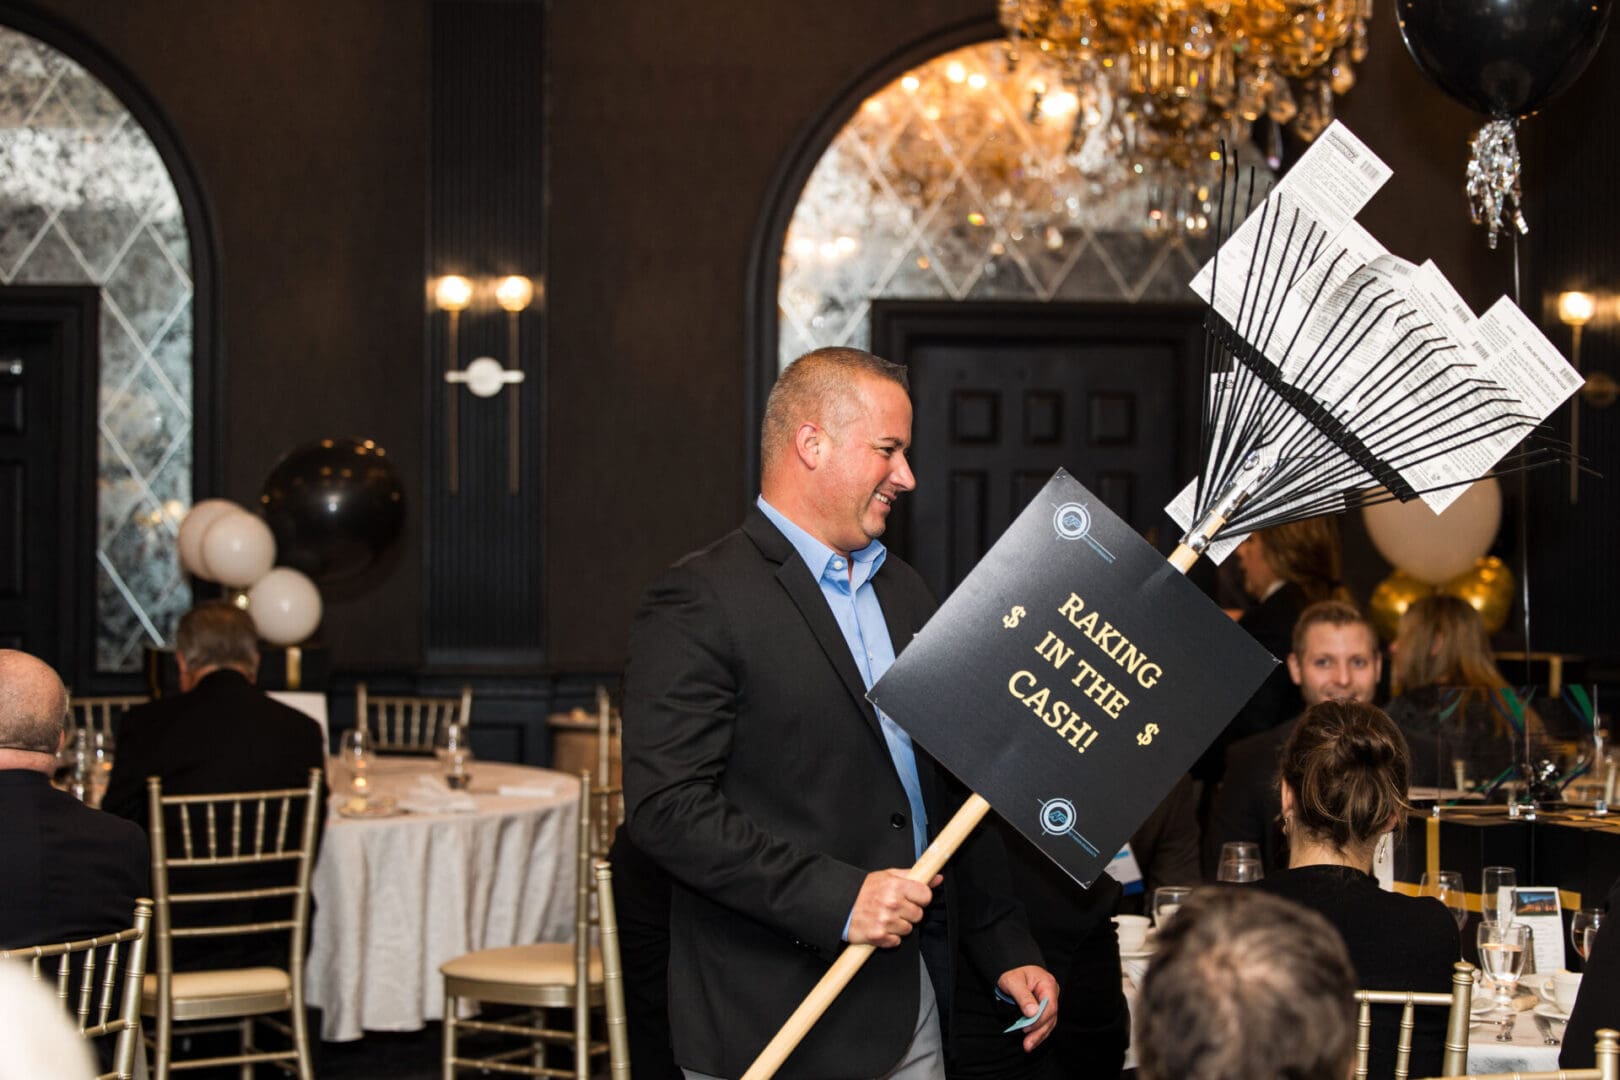 A man holding a sign at a banquet table.